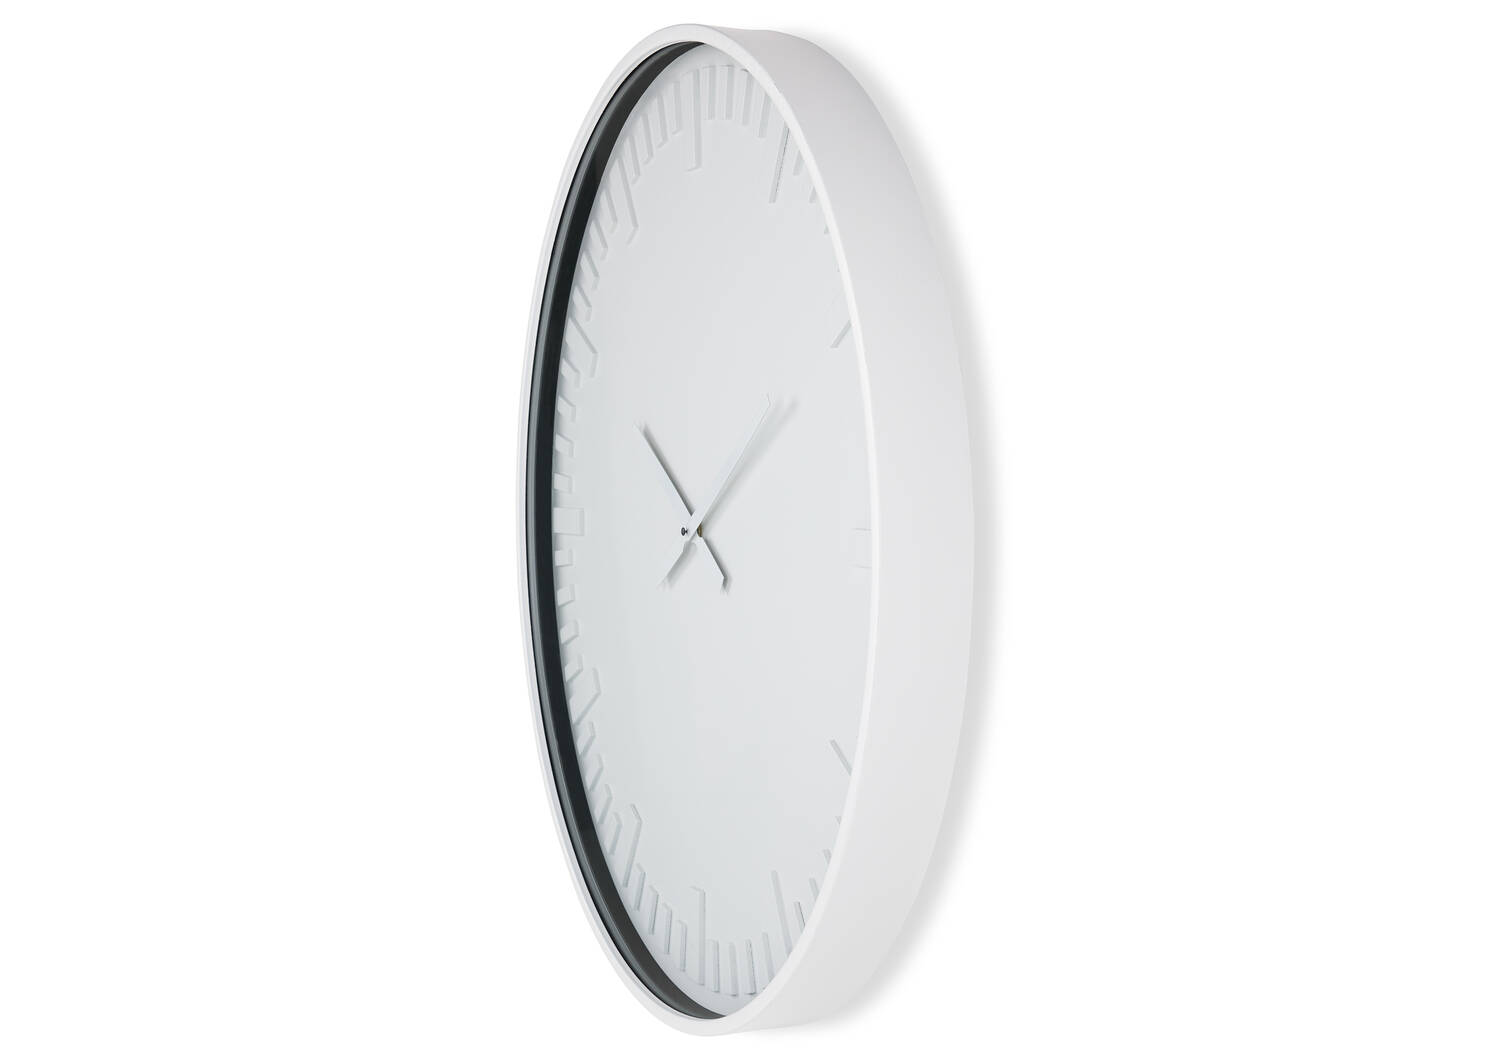 Curie Wall Clock